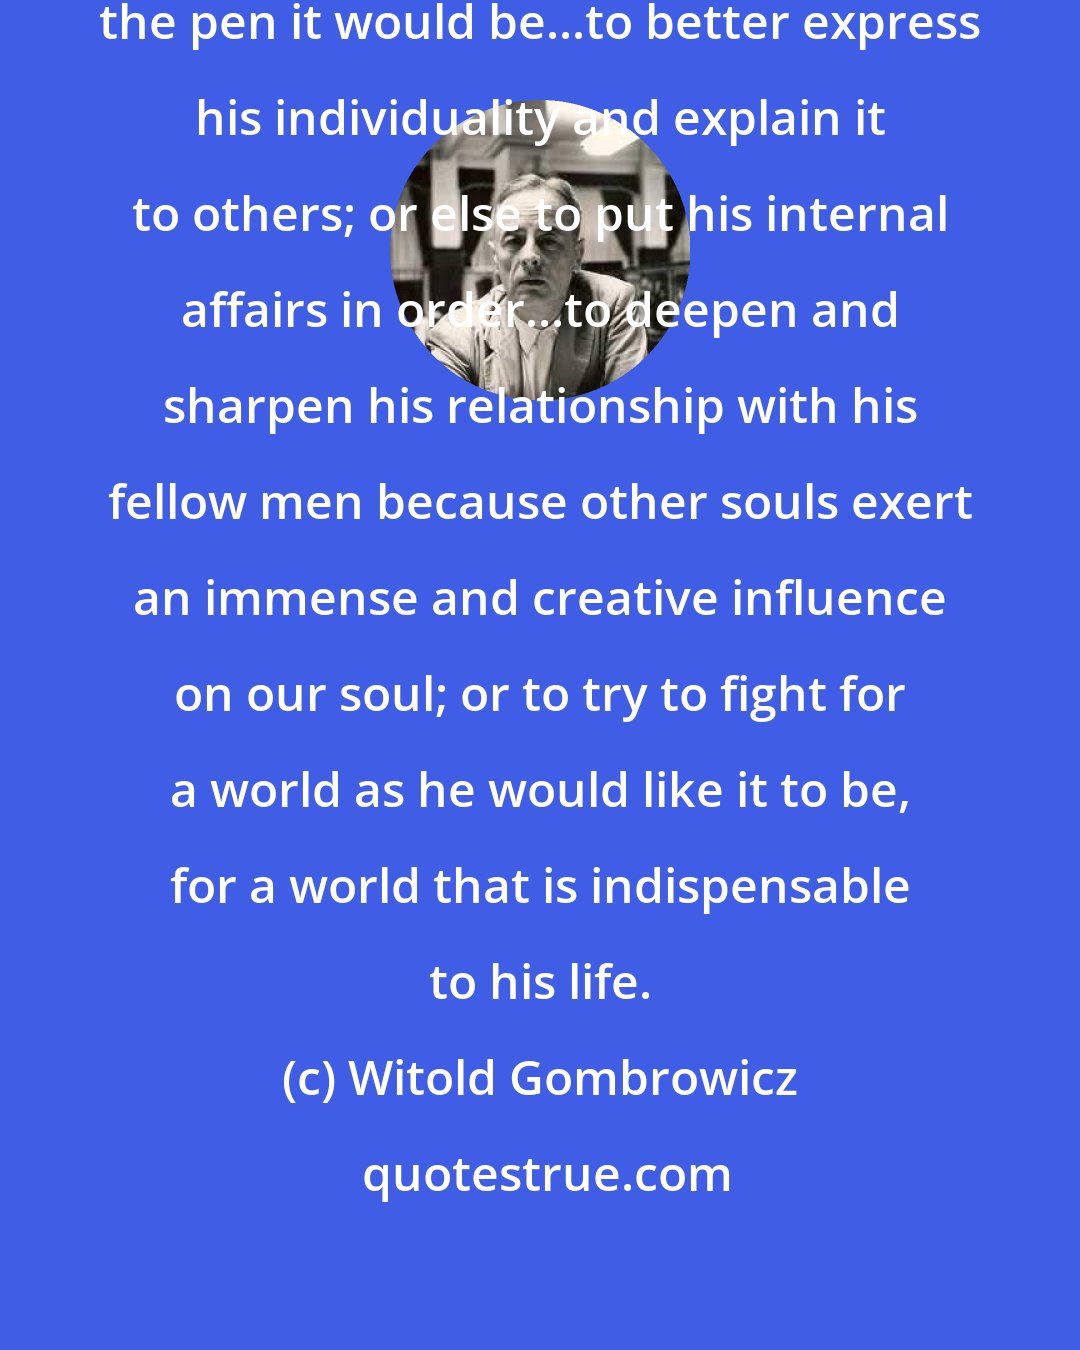 Witold Gombrowicz: If he [the Artist] were to take up the pen it would be...to better express his individuality and explain it to others; or else to put his internal affairs in order...to deepen and sharpen his relationship with his fellow men because other souls exert an immense and creative influence on our soul; or to try to fight for a world as he would like it to be, for a world that is indispensable to his life.